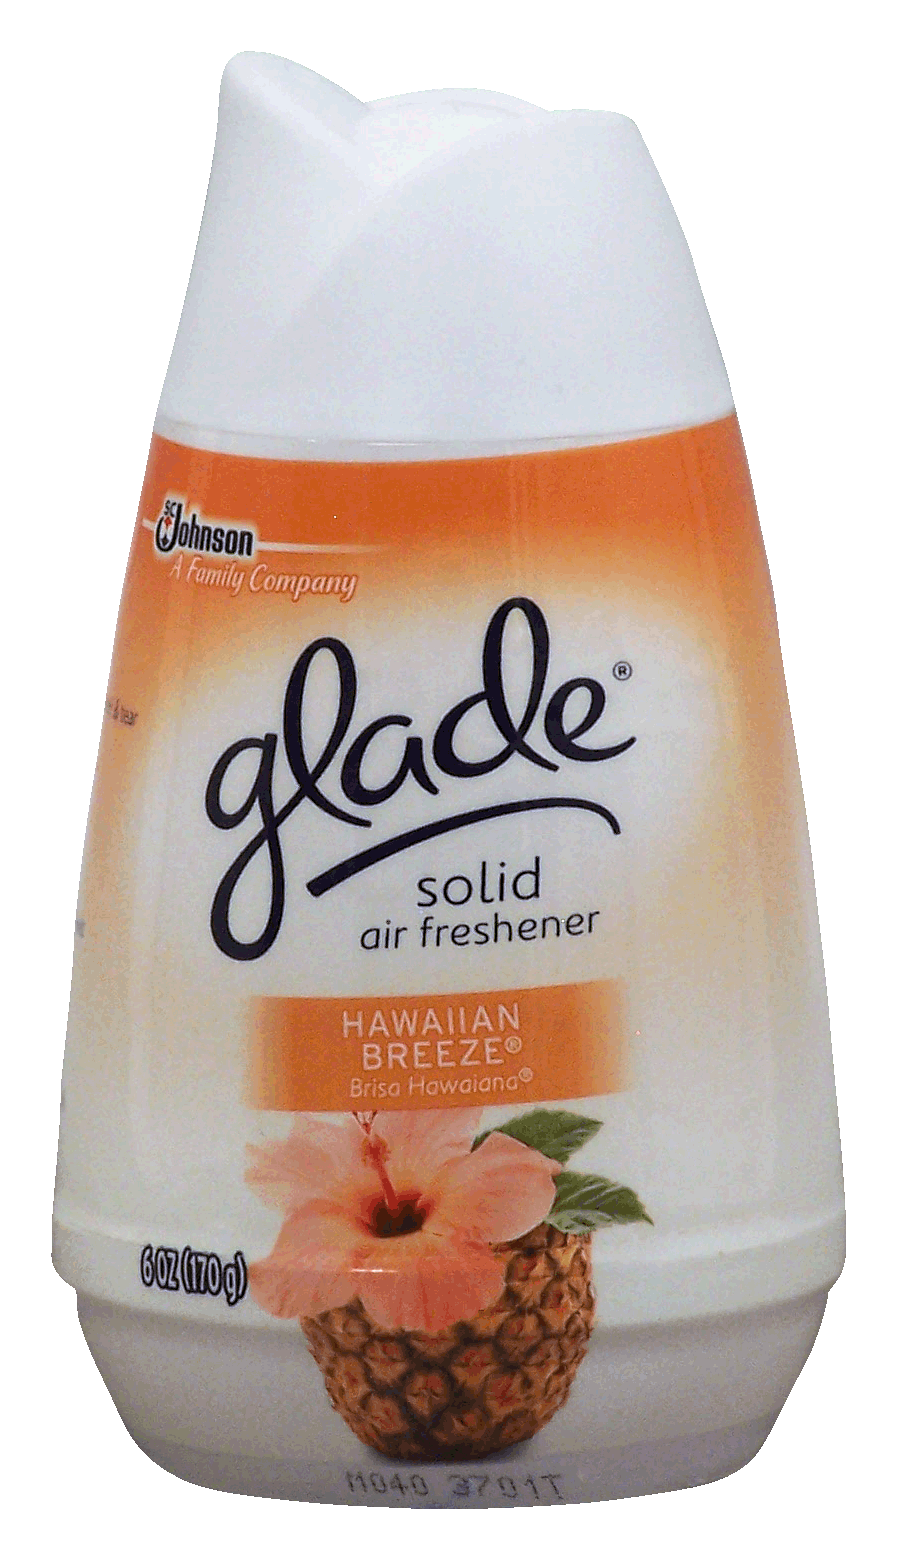 Glade  solid air freshener, hawaiian breeze scent Full-Size Picture